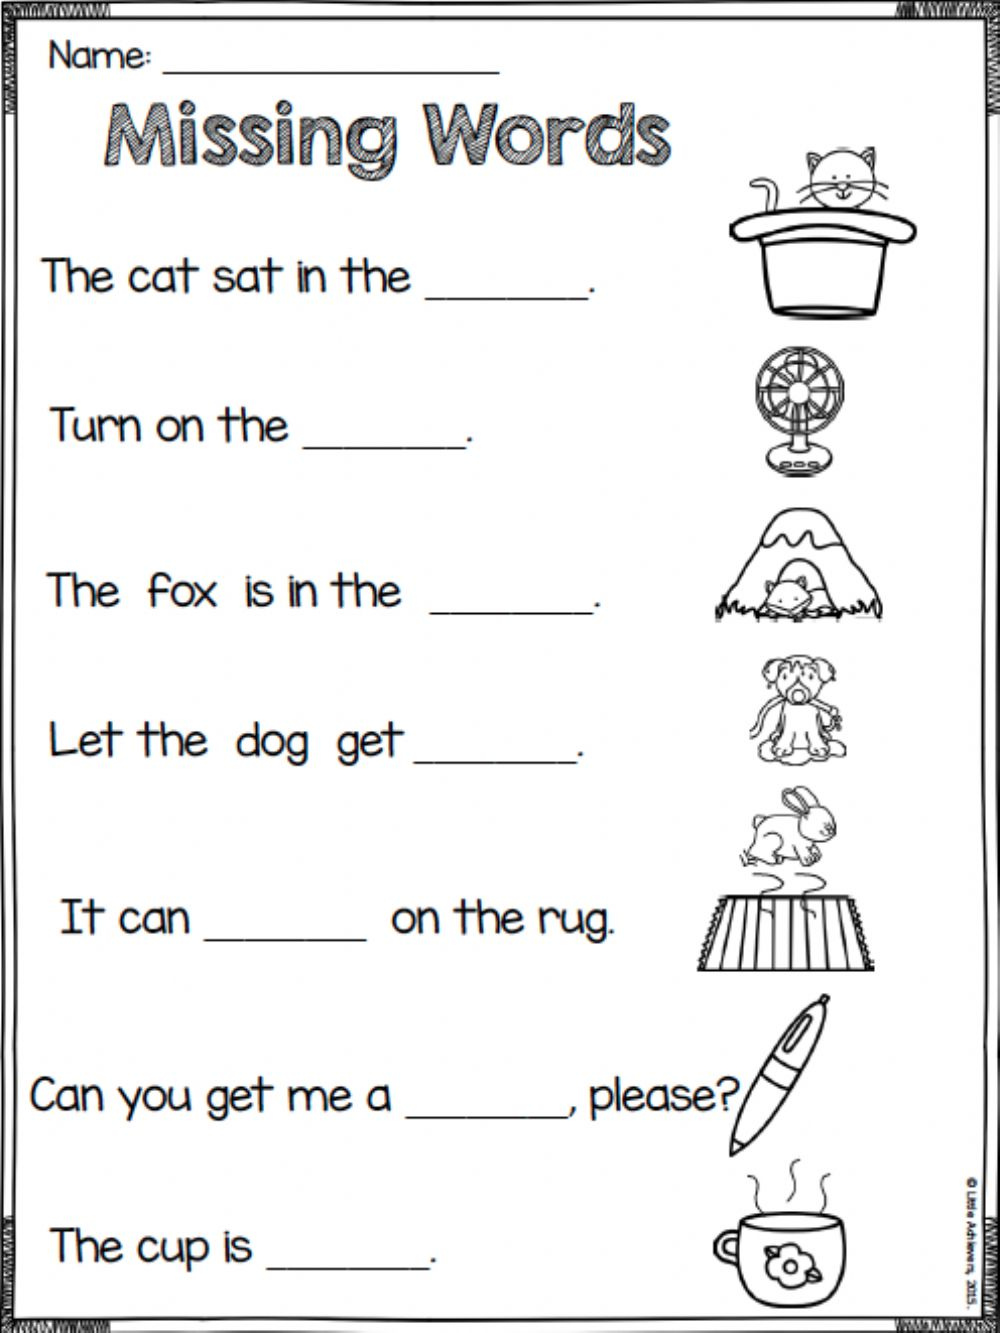 fill-in-the-missing-letters-in-words-printable-worksheets-peggy